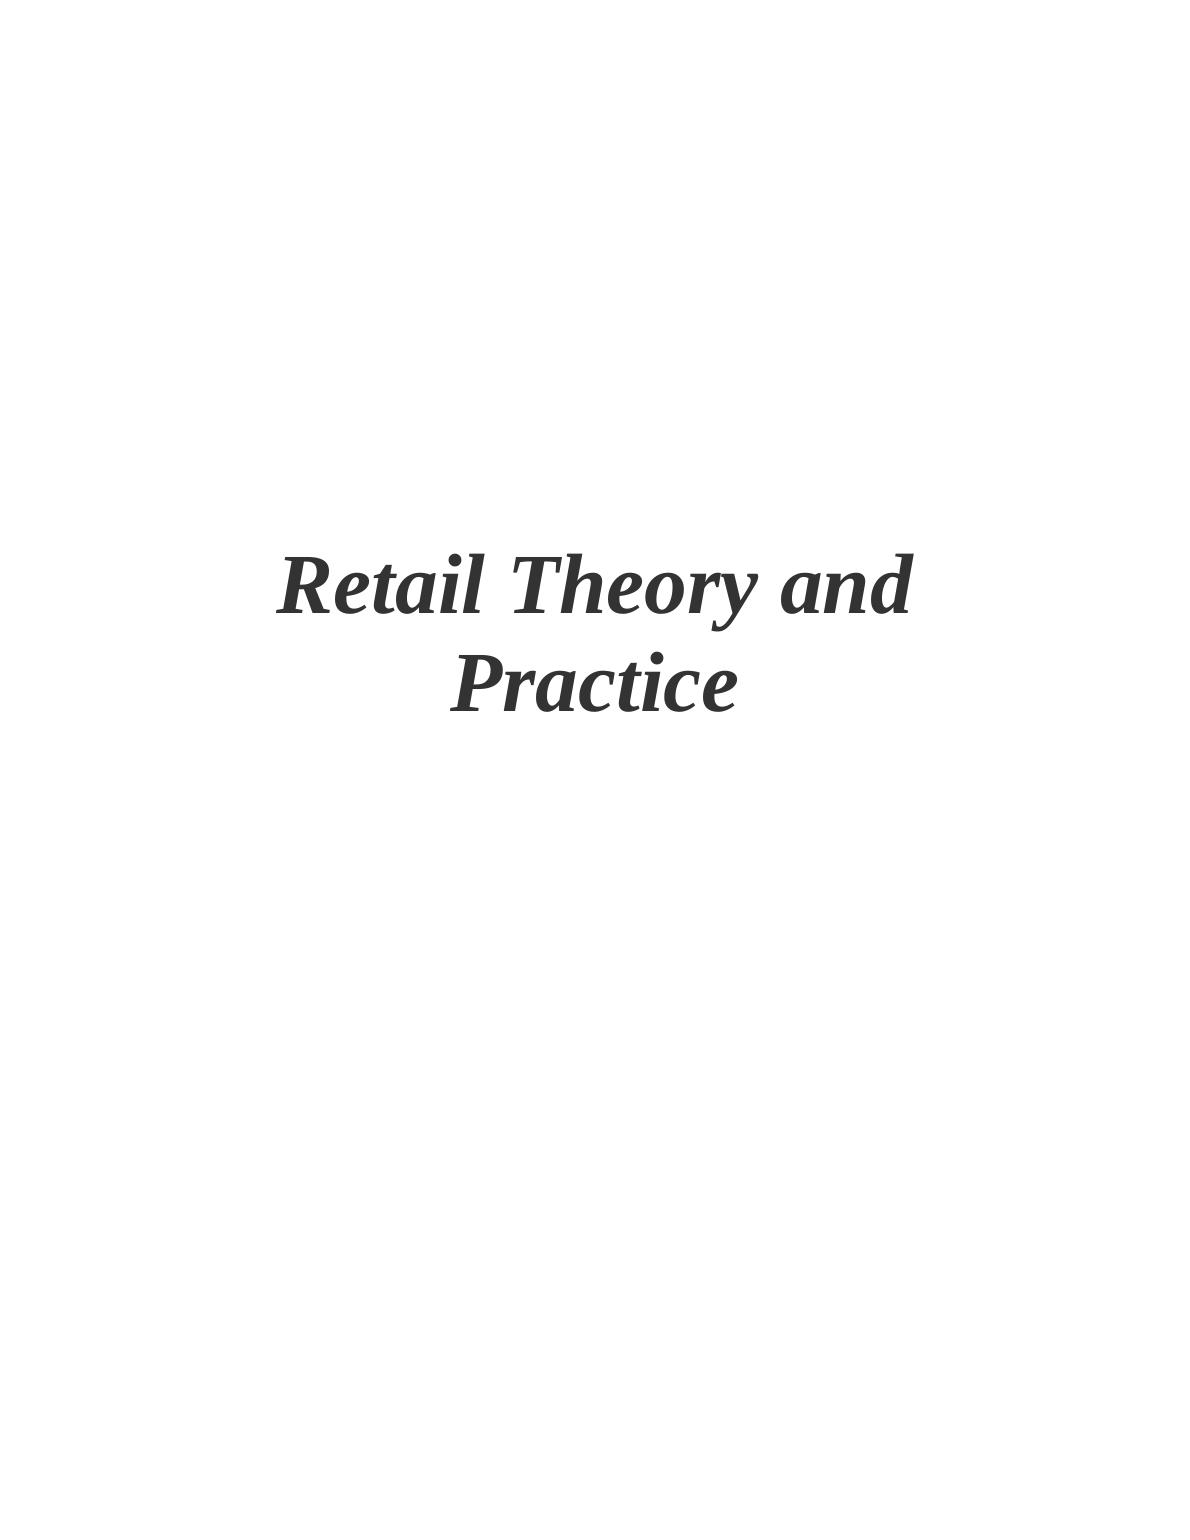 Retail Theory and Practice INTRODUCTION 4 MAIN BODY4 Part A4 Overview of the UK Fashion Retailing_1